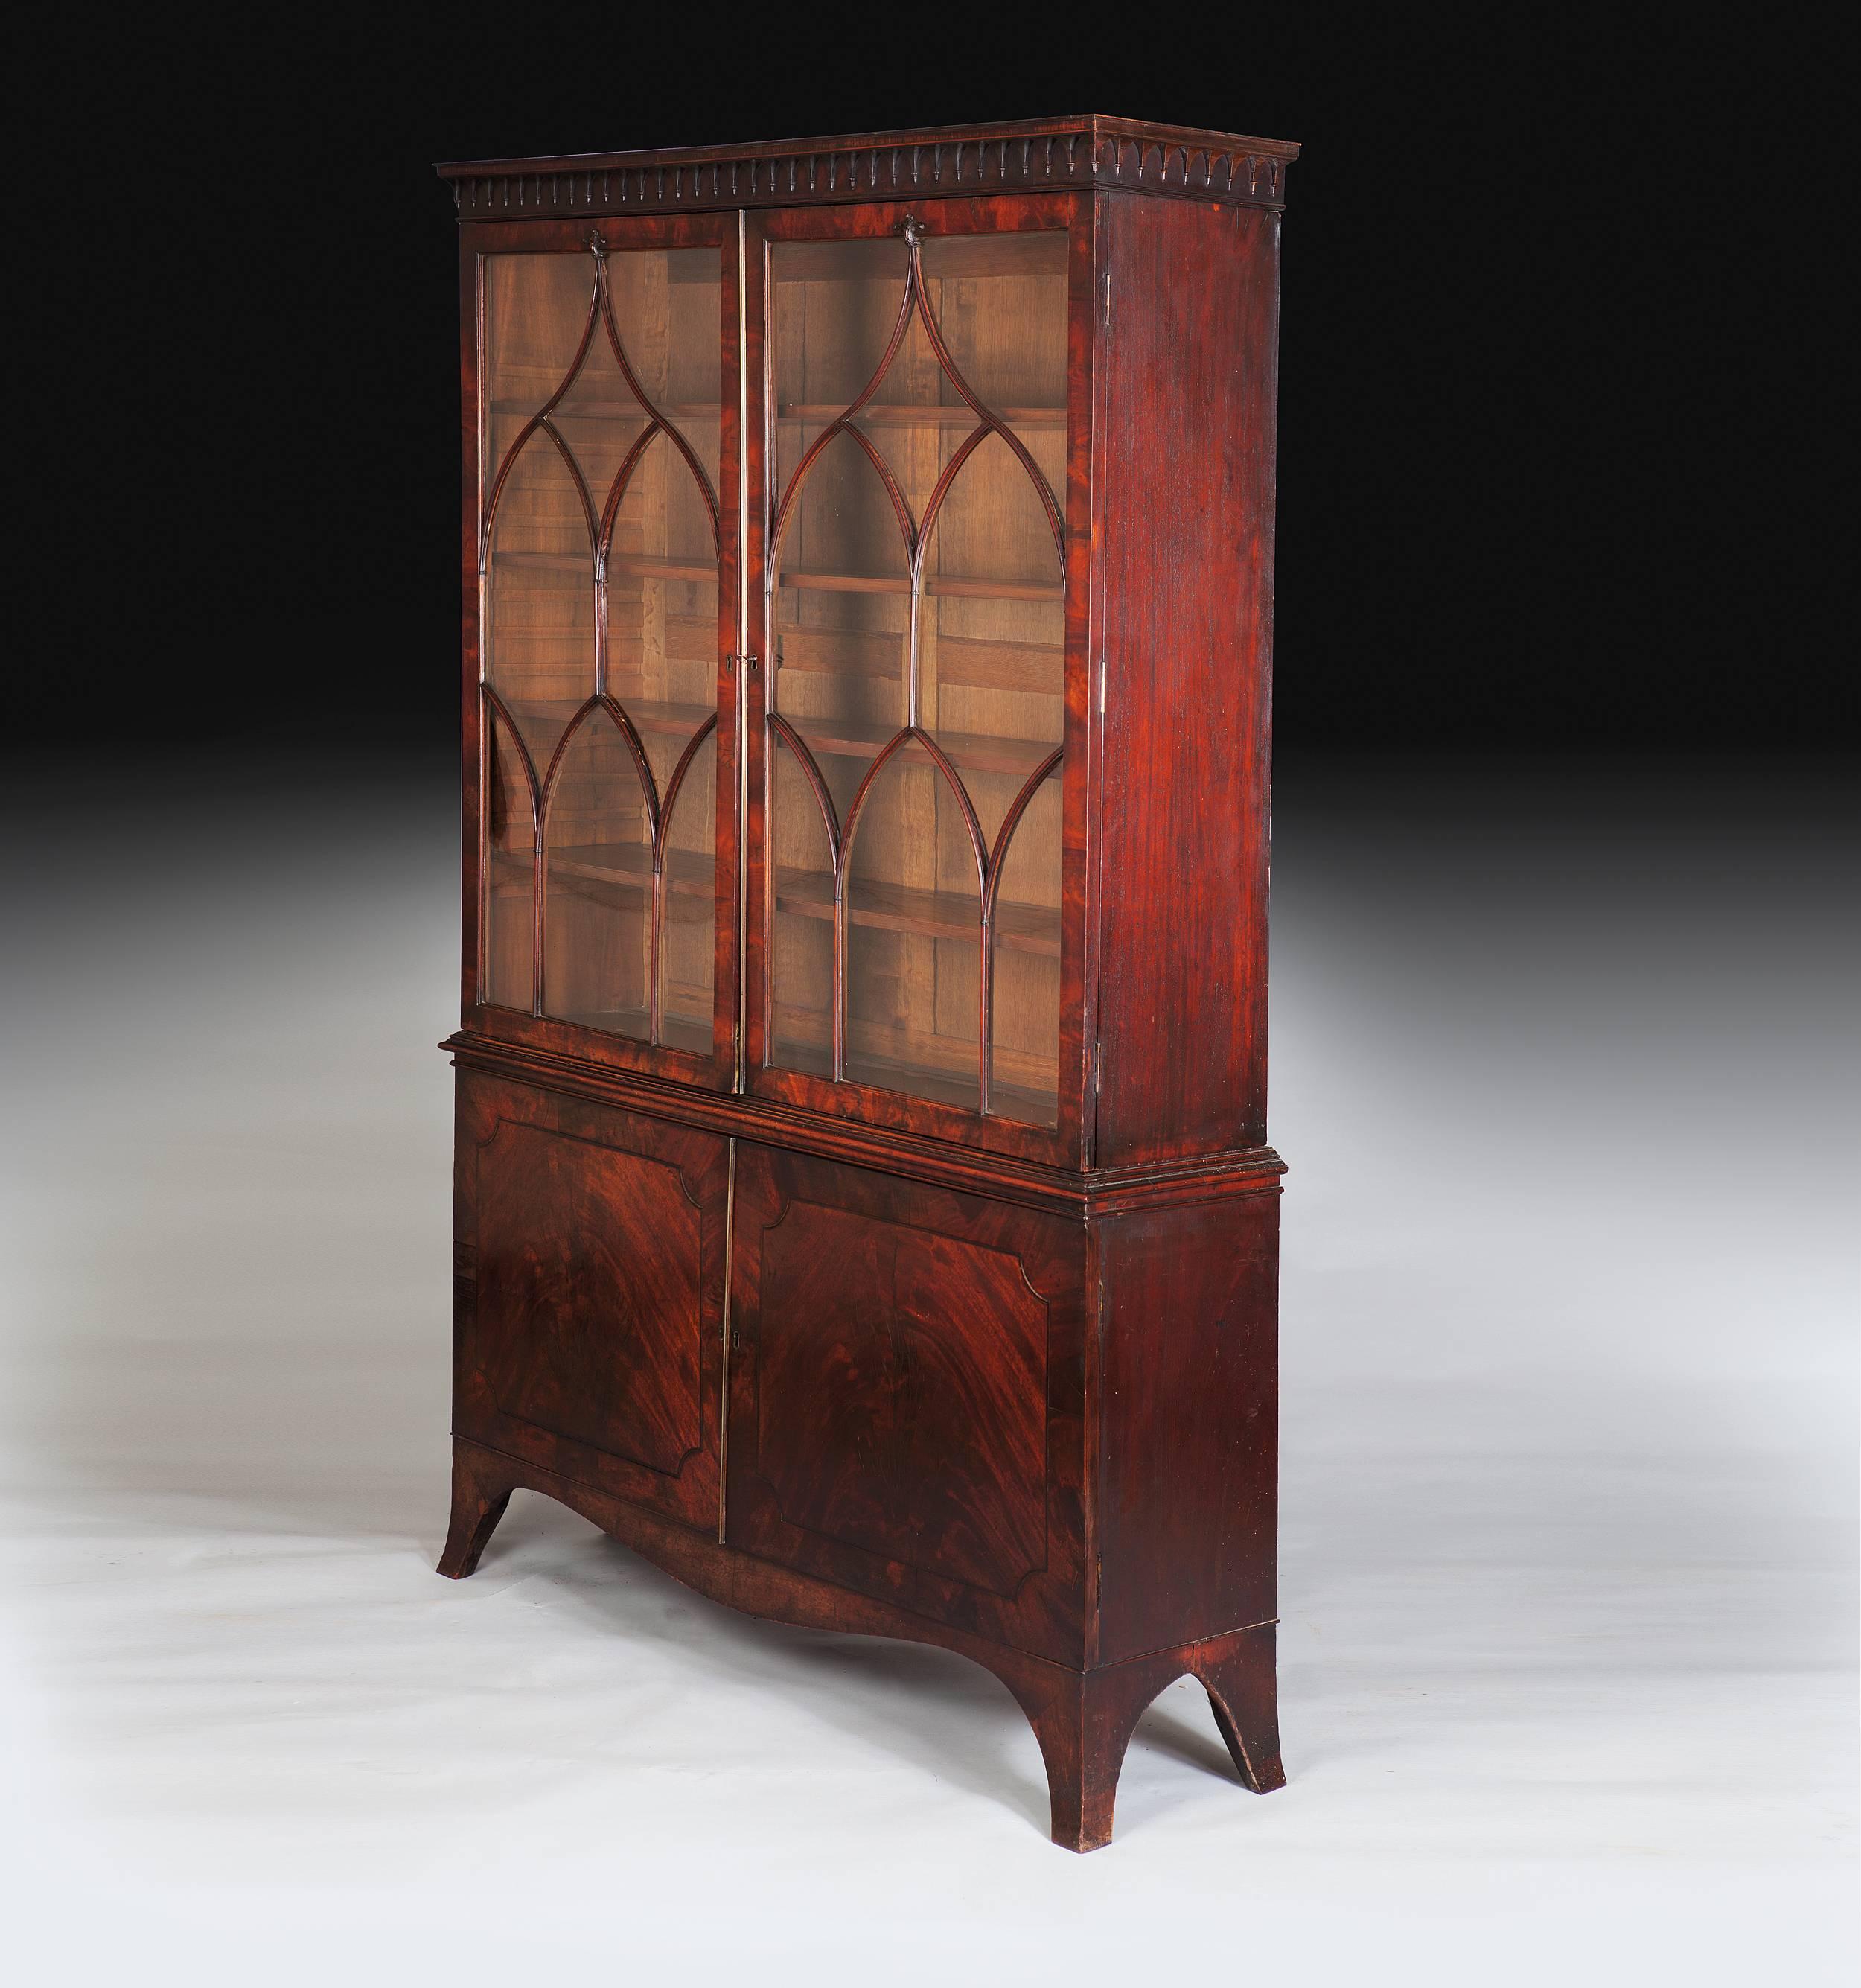 England, 1770.

A fine late 18th century George III mahogany bookcase, the upper section with glazed doors and Gothic mullions opening to a shelved interior below a fine frieze with Gothic pendants. Above cupboard doors with rich figuring opening